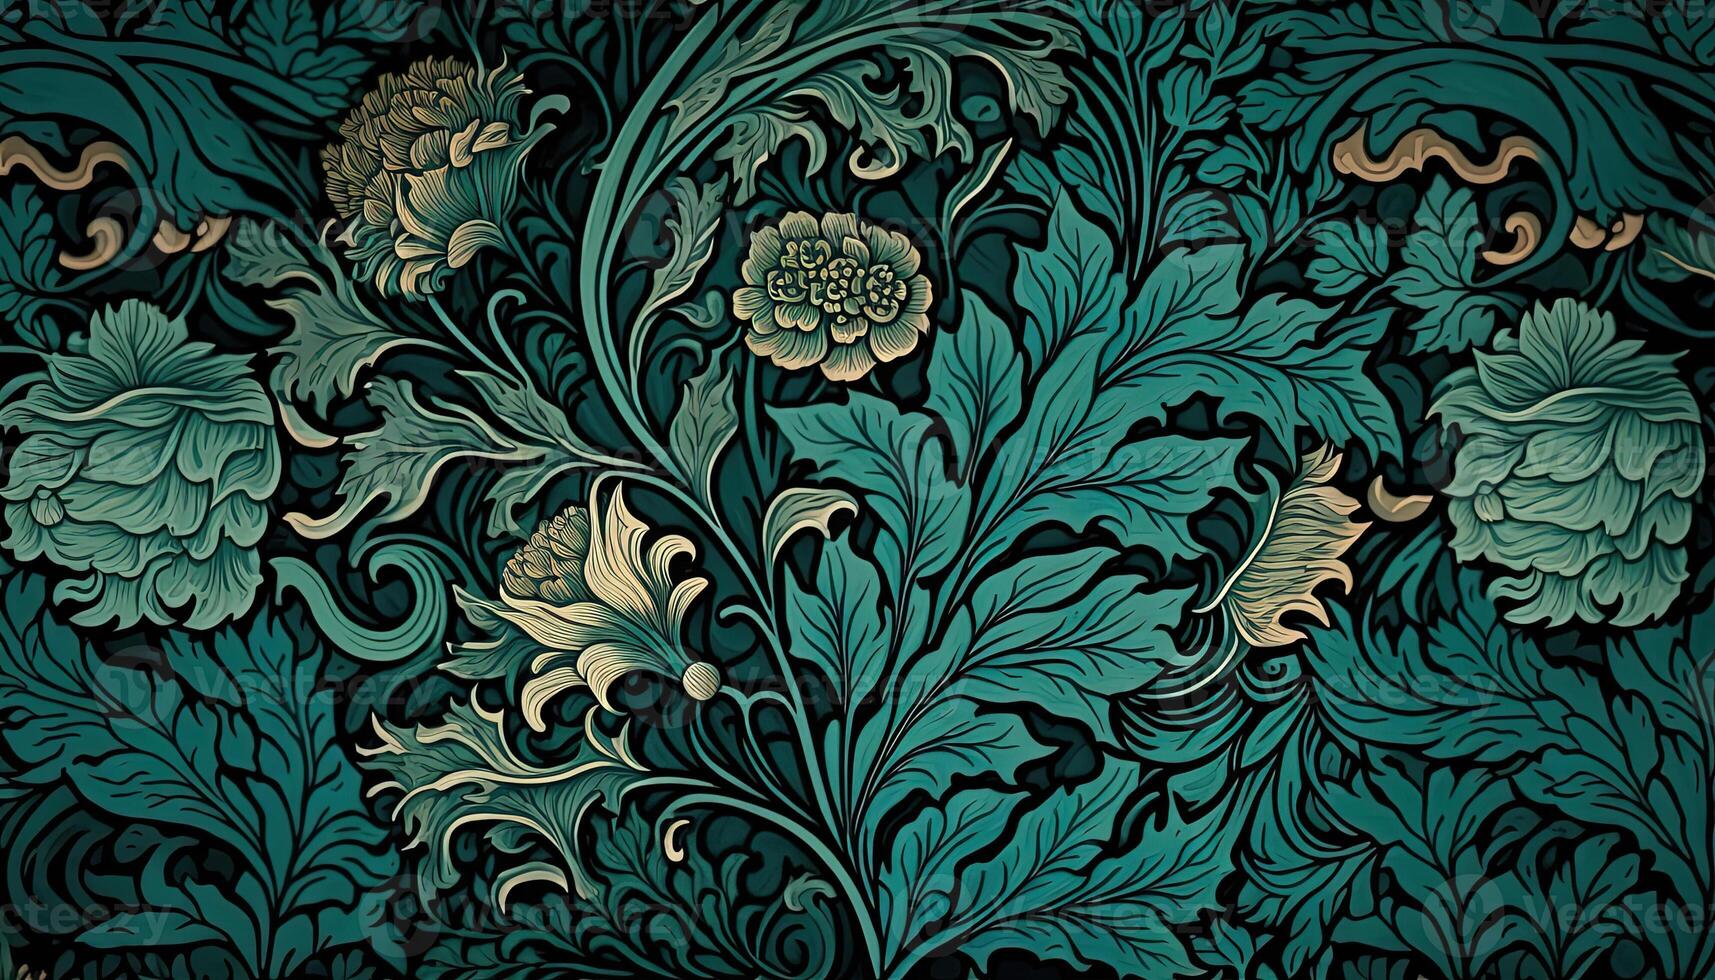 , Floral teal, green blue pattern. William Morris inspired natural plants and flowers background, vintage illustration. Foliage ornament. photo